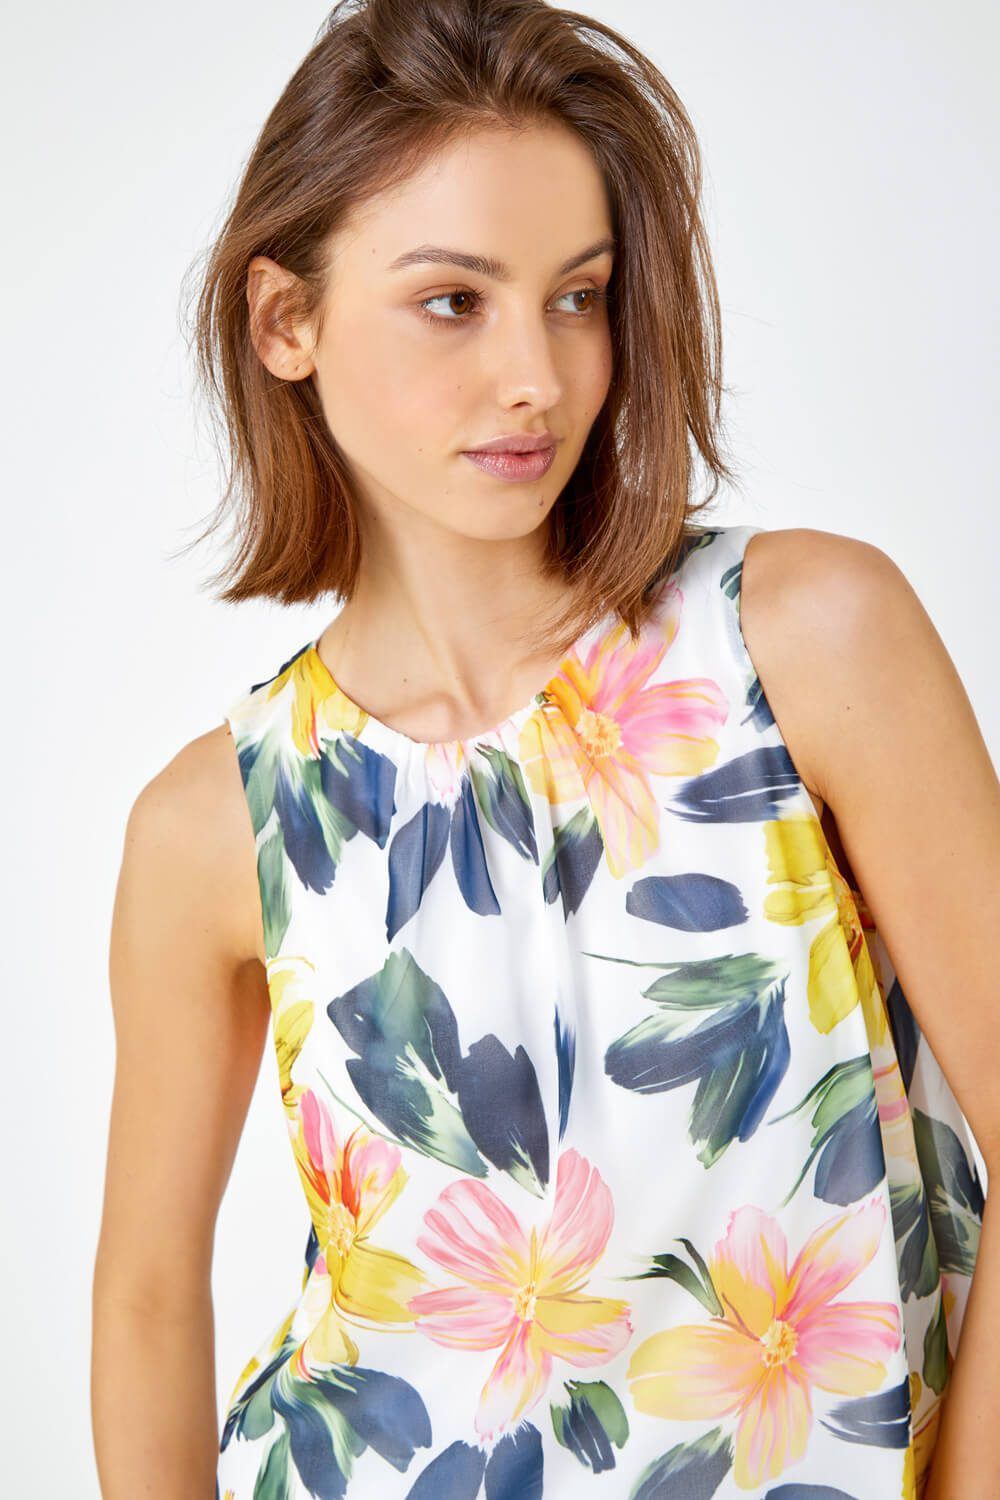 Yellow Floral Print Sleeveless Top, Image 4 of 5